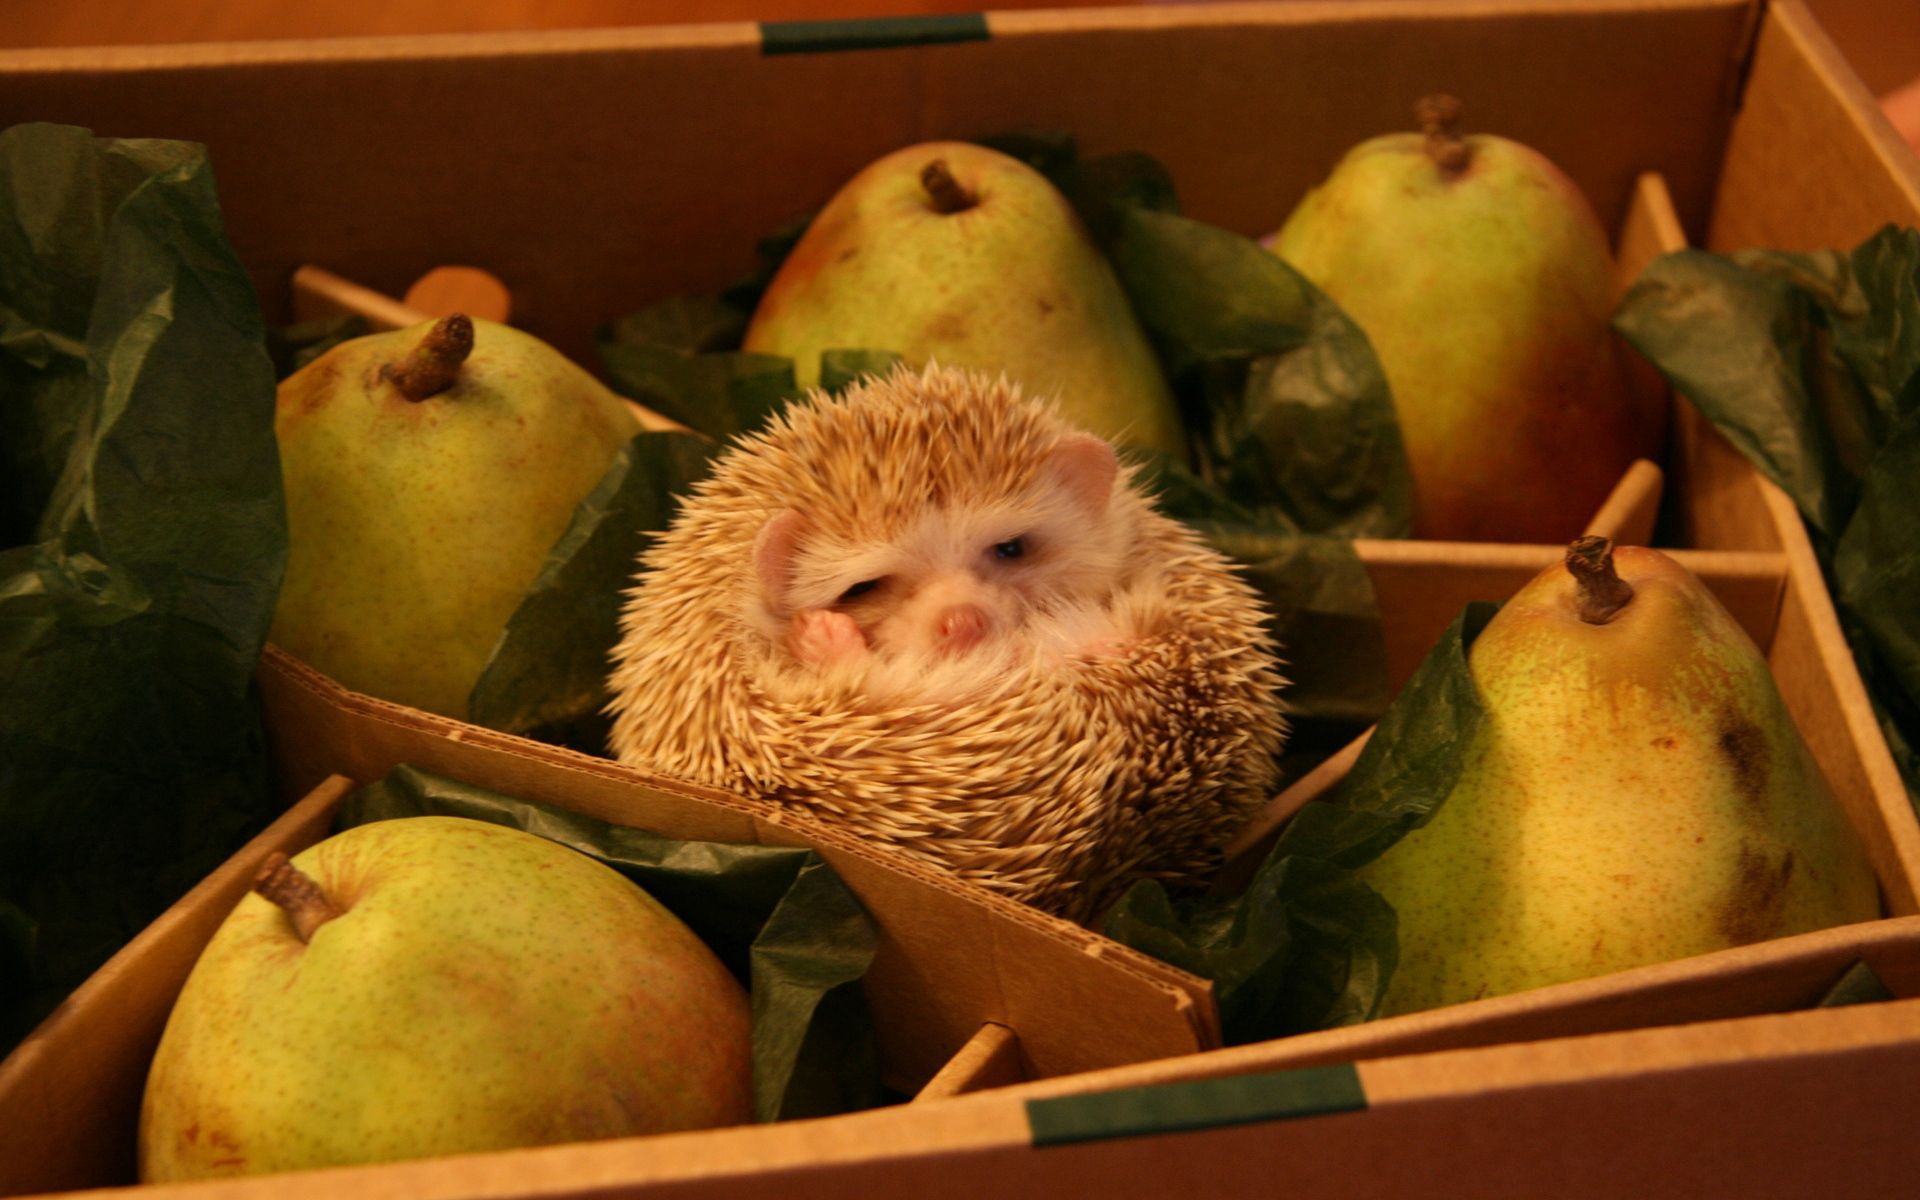 129299 Screensavers and Wallpapers Box for phone. Download animals, pears, box, hedgehog, joke pictures for free